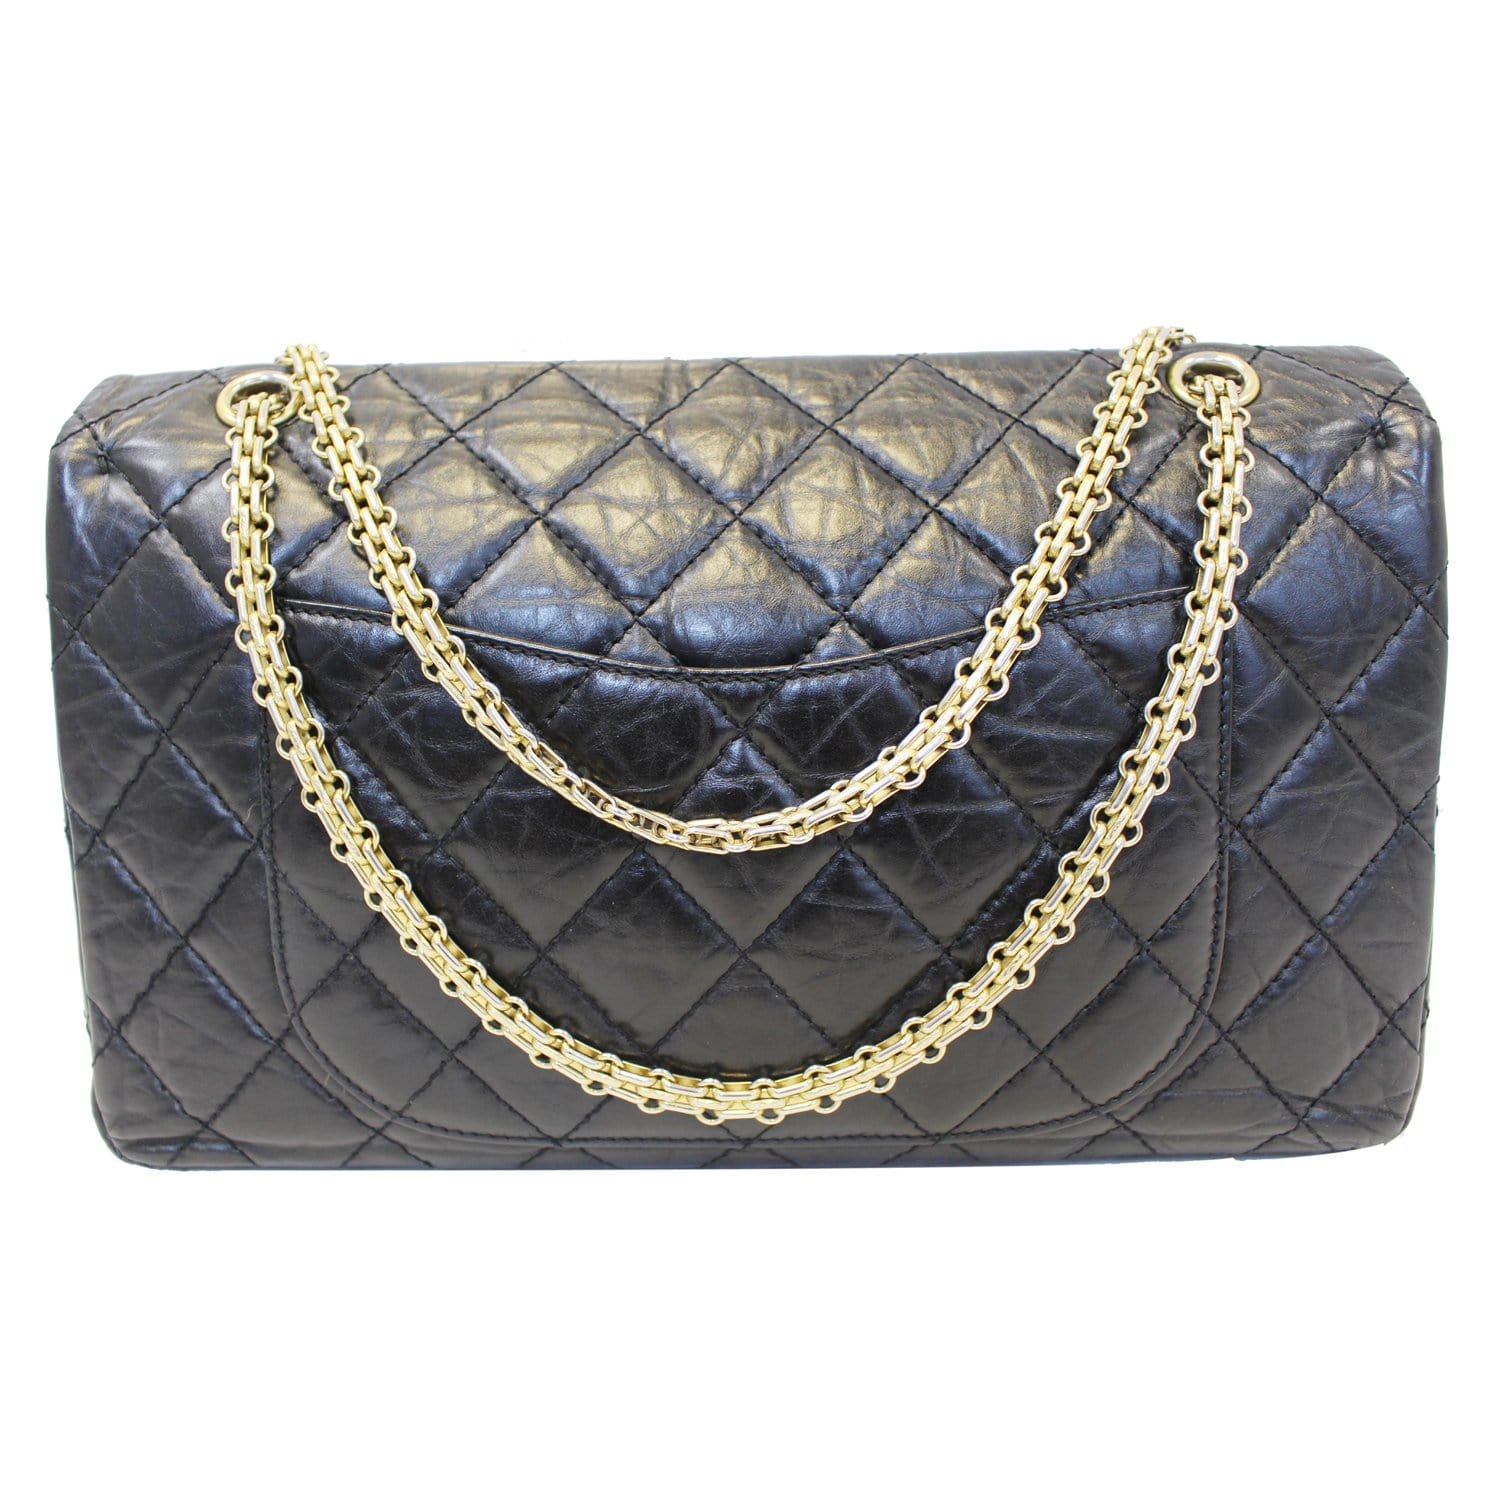 Chanel 2.55 Reissue Classic Flap Bag: Reflection Of Coco Chanel